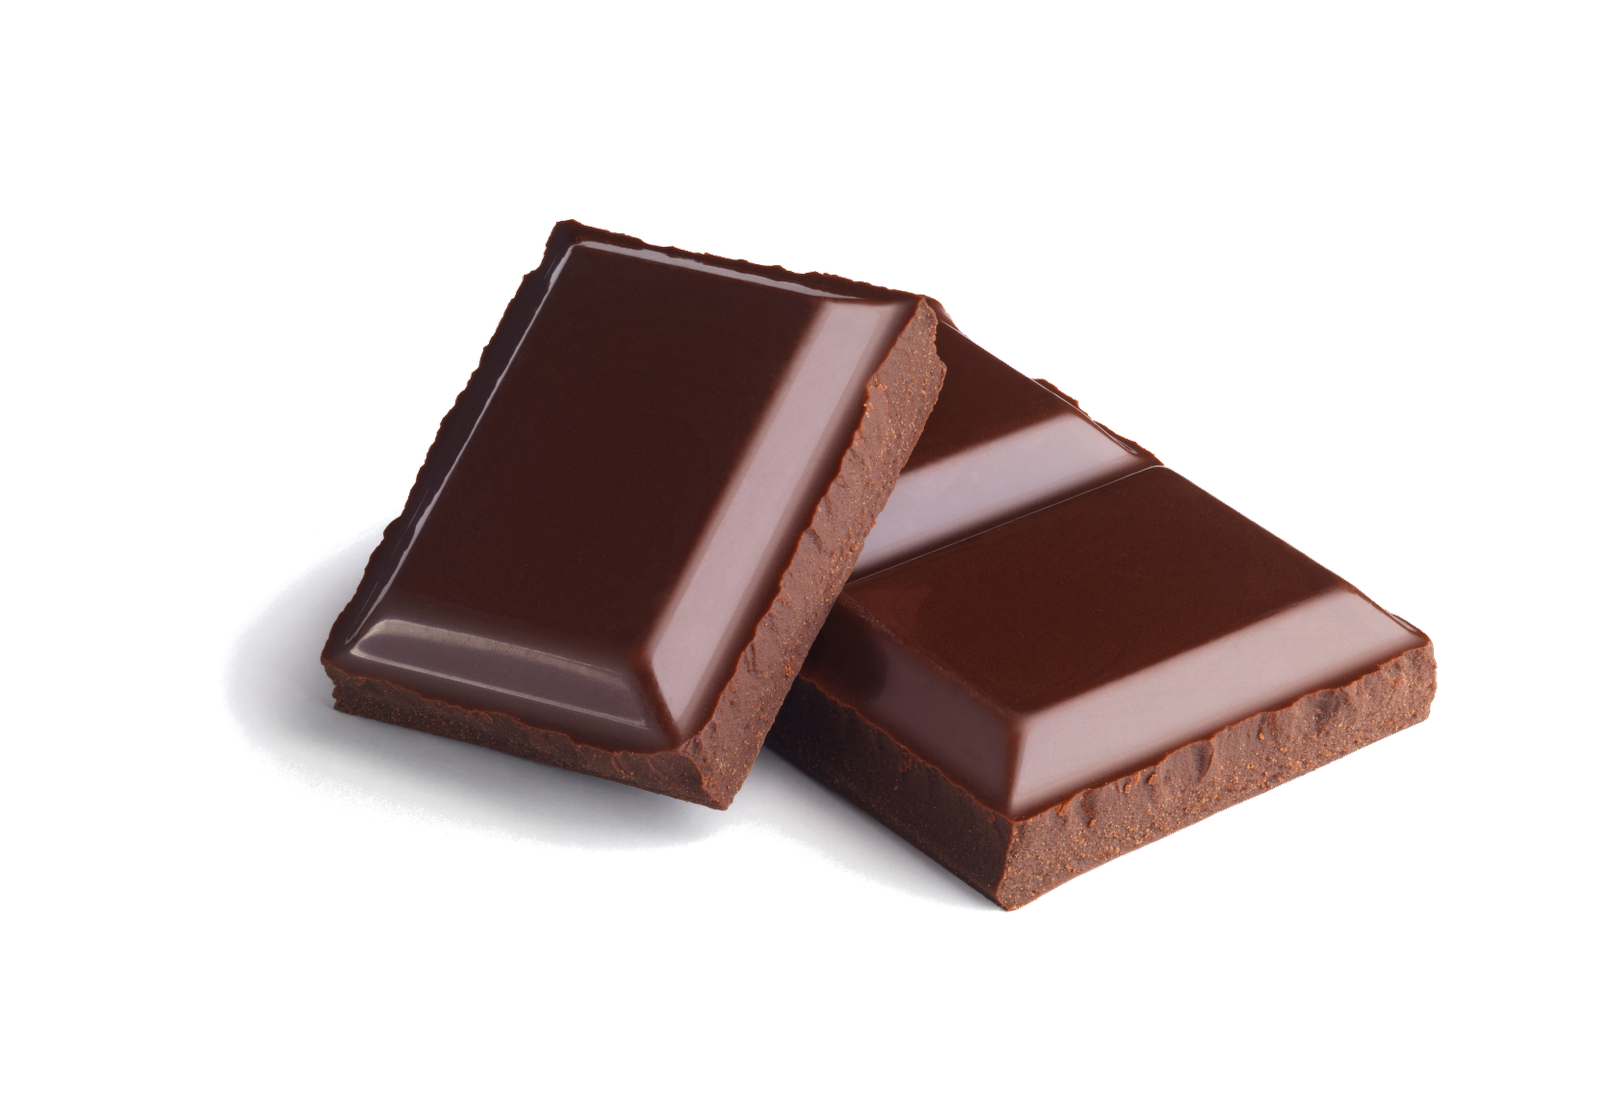 Chocolate Png Image - Ambrozijntje, Transparent background PNG HD thumbnail